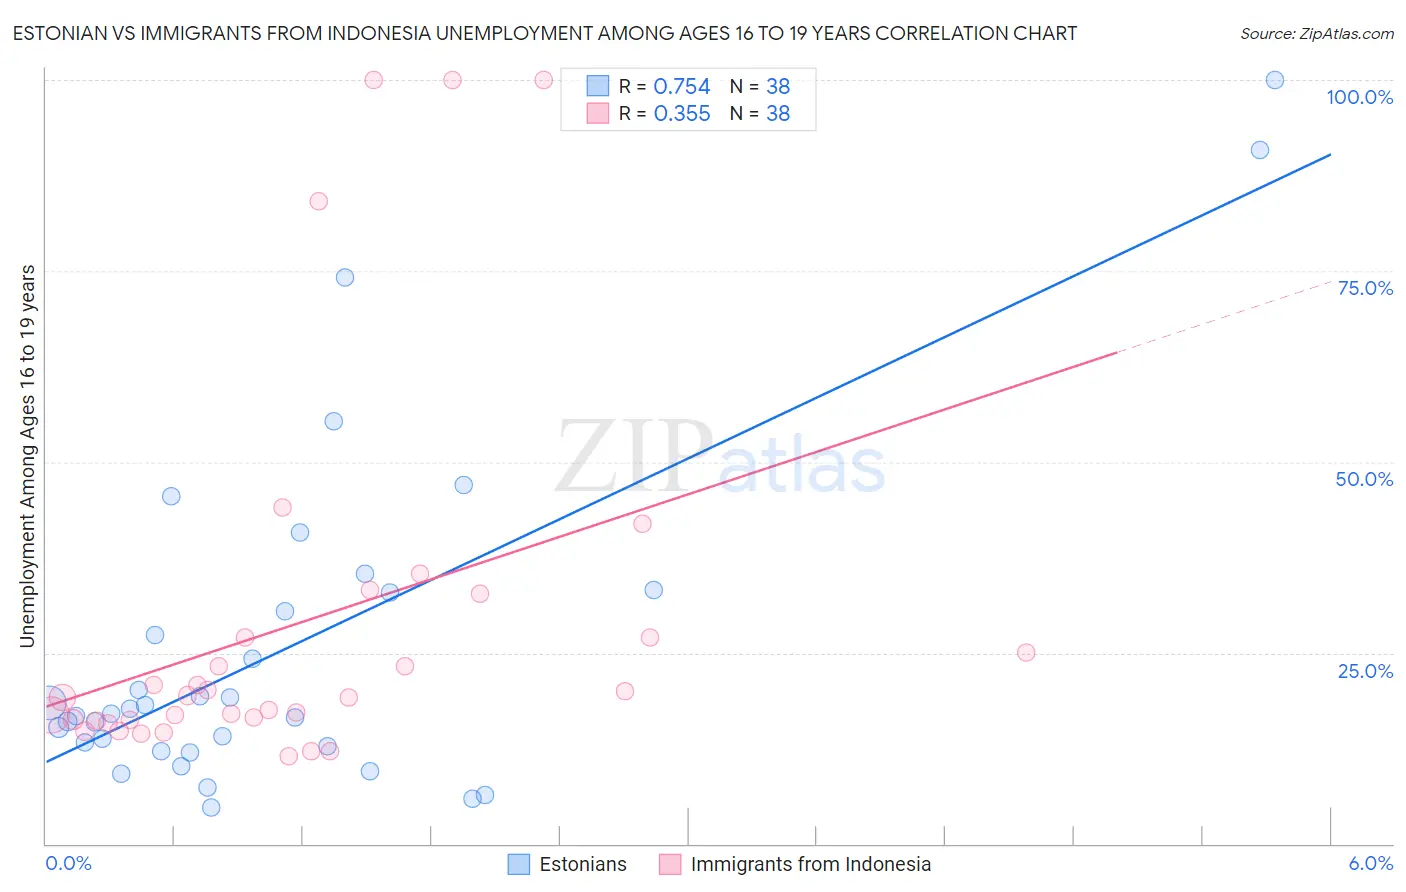 Estonian vs Immigrants from Indonesia Unemployment Among Ages 16 to 19 years